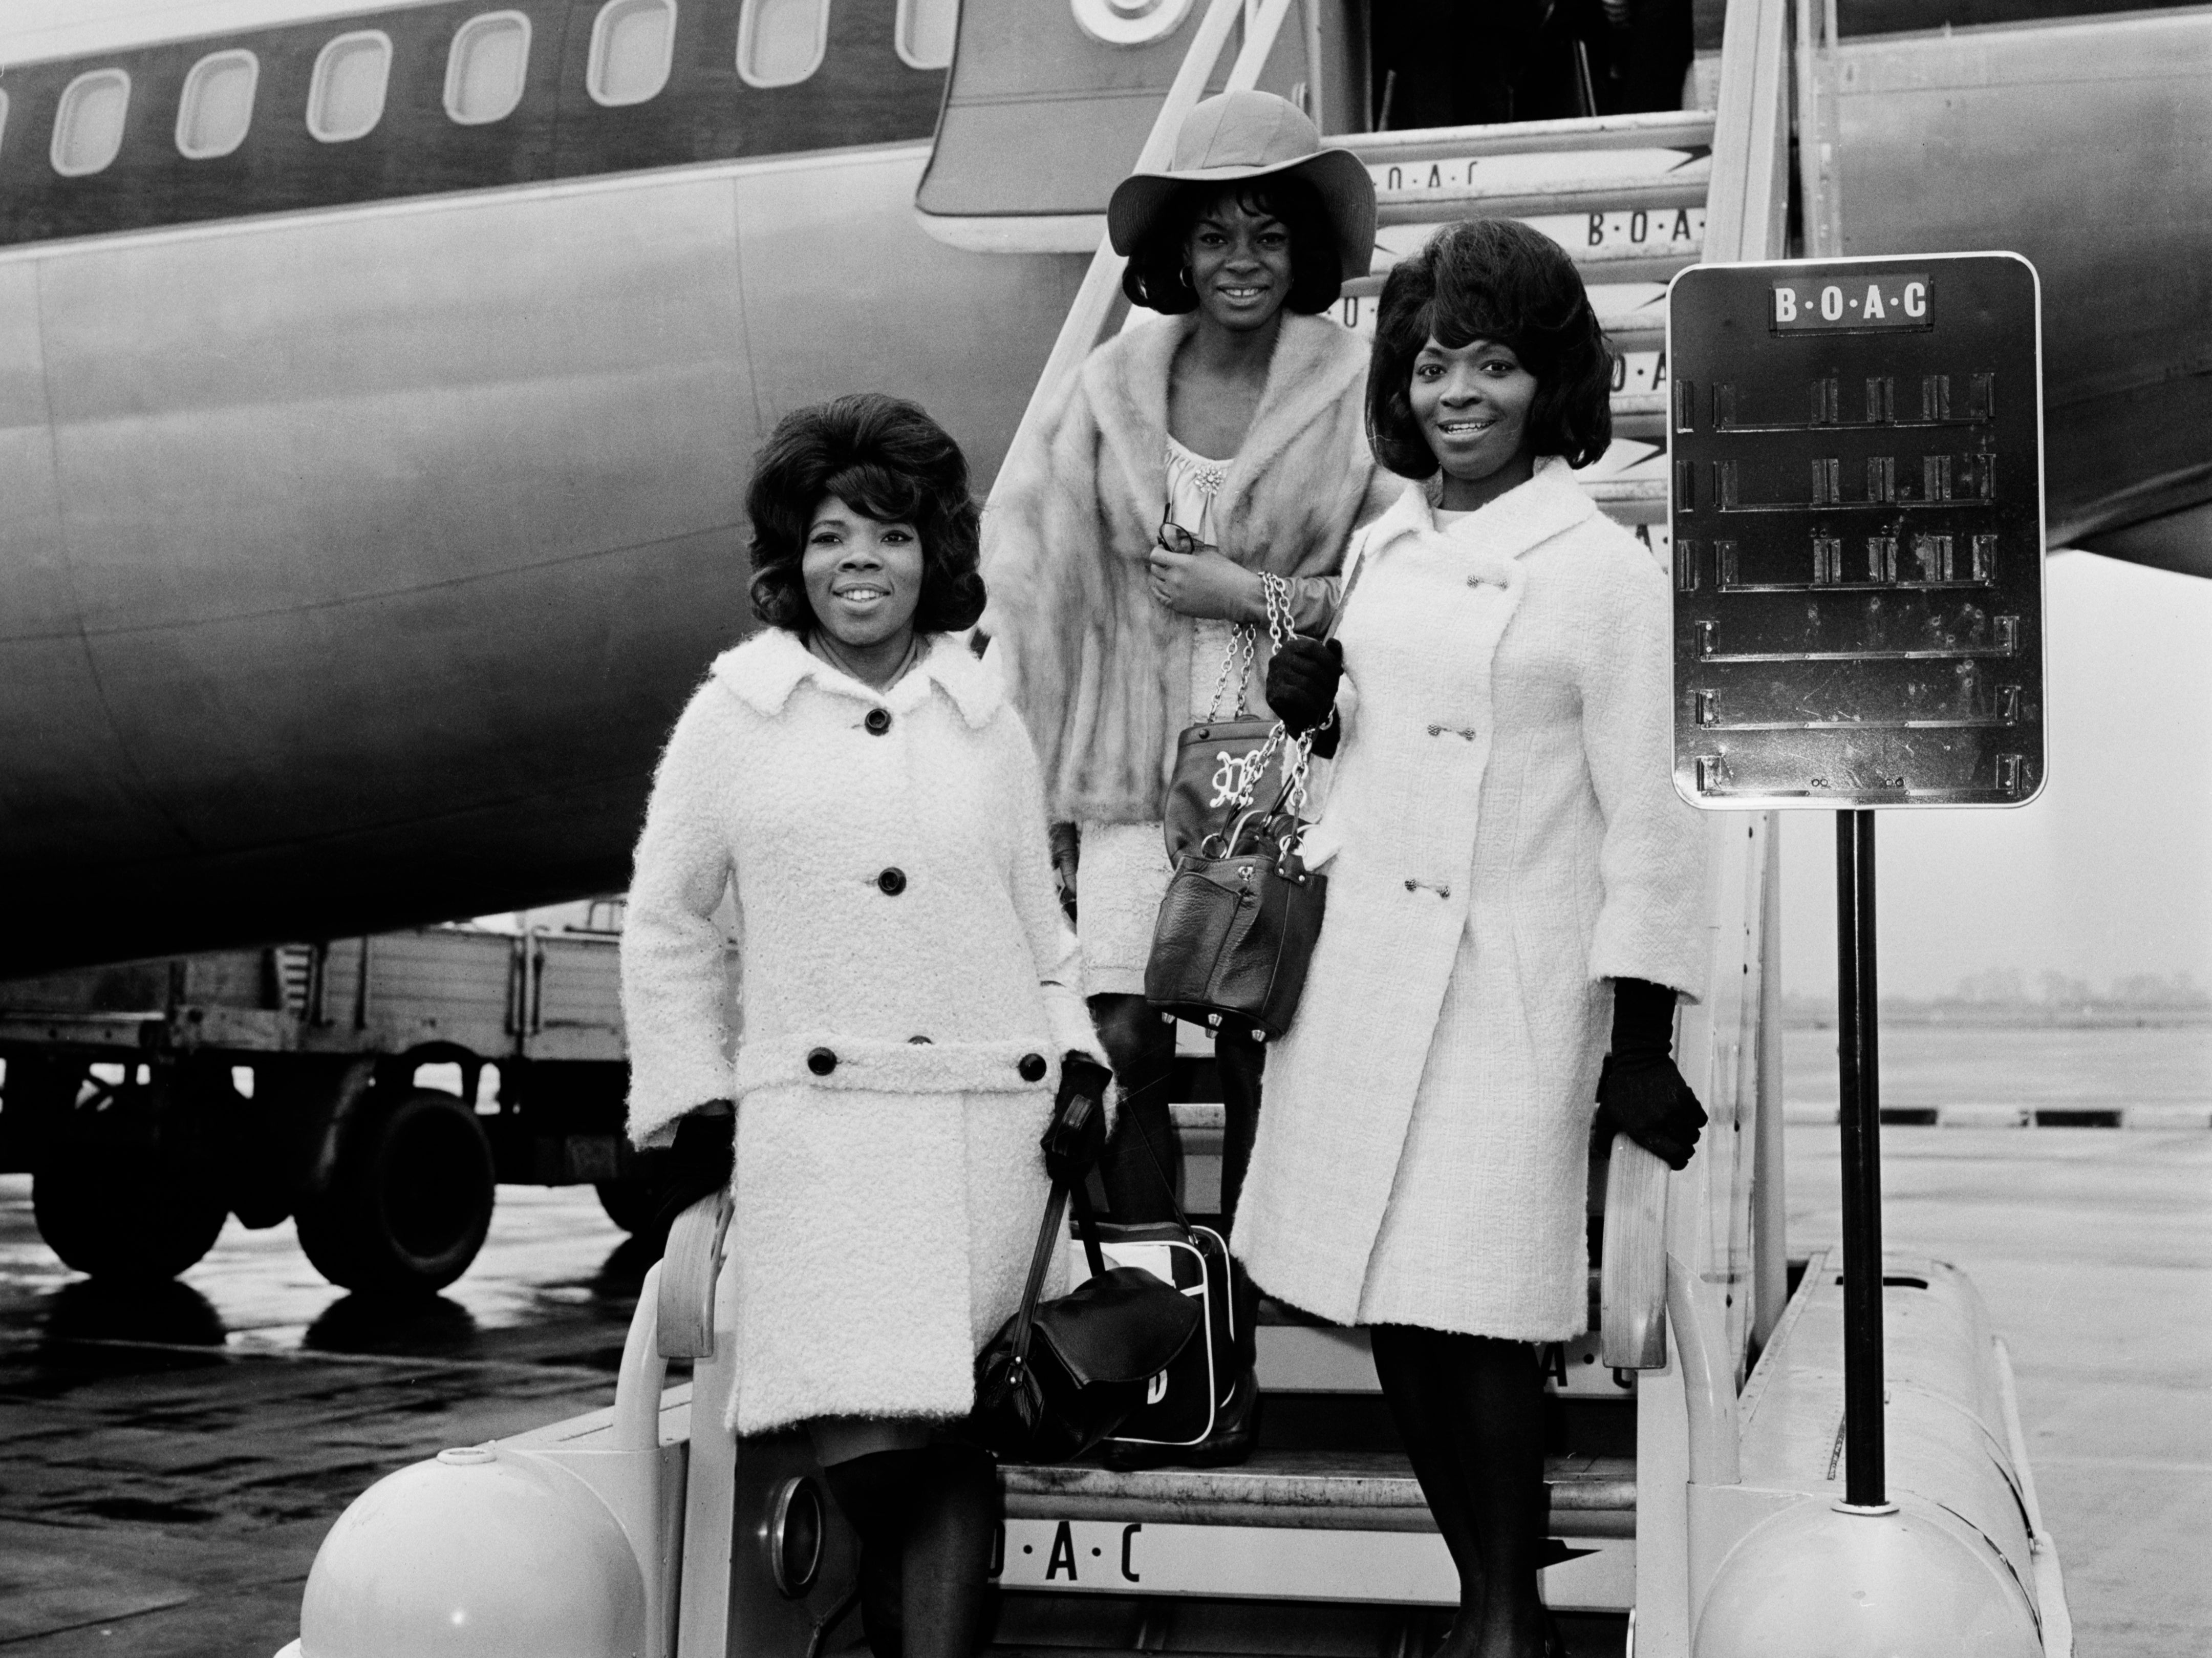 Jet set: left to right, Rosalind Ashford, Martha Reeves and Betty Kelly